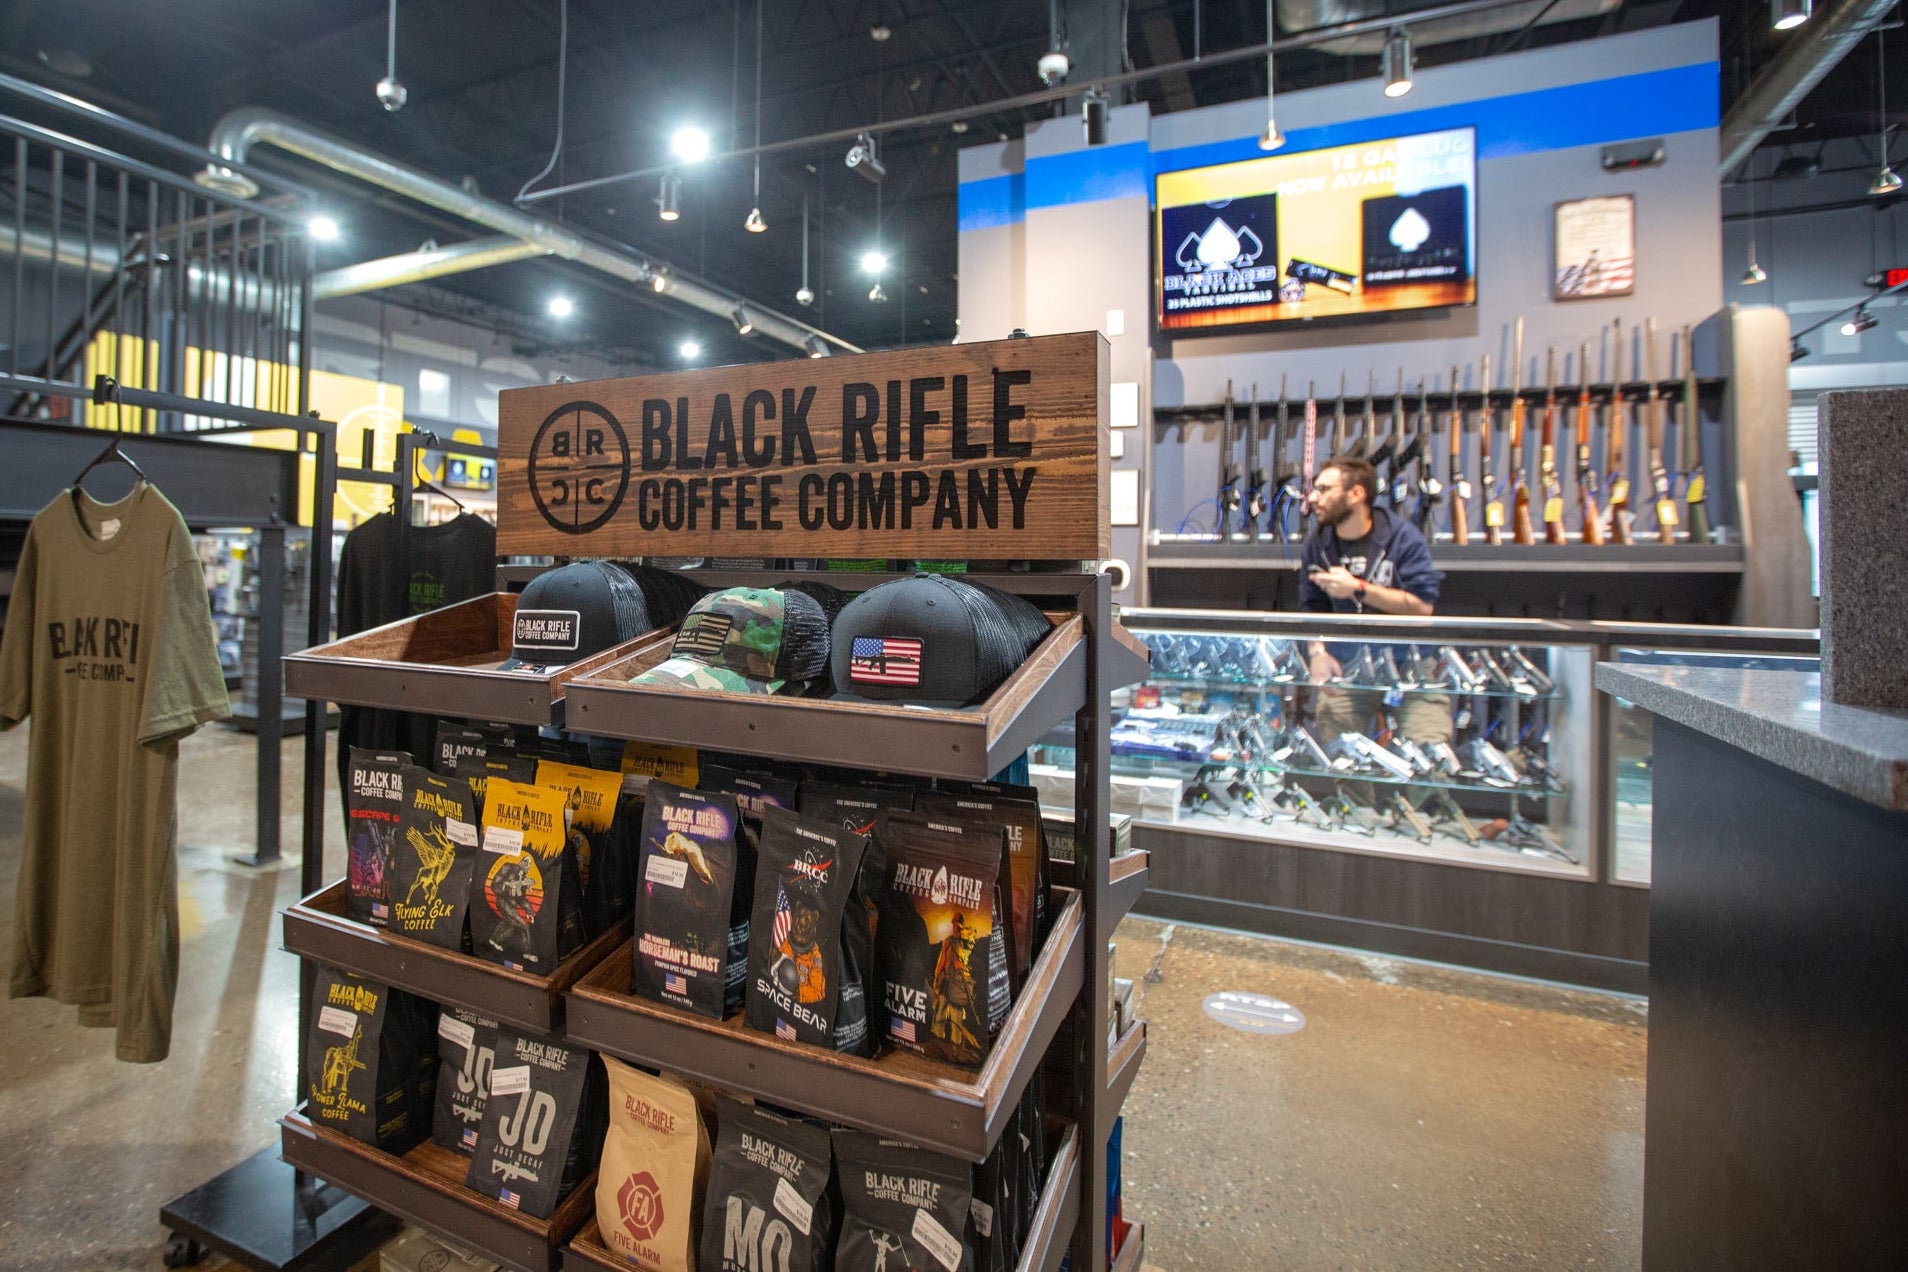 A shelf of Black Rifle Coffee products in front of glass display cases full of guns in a store